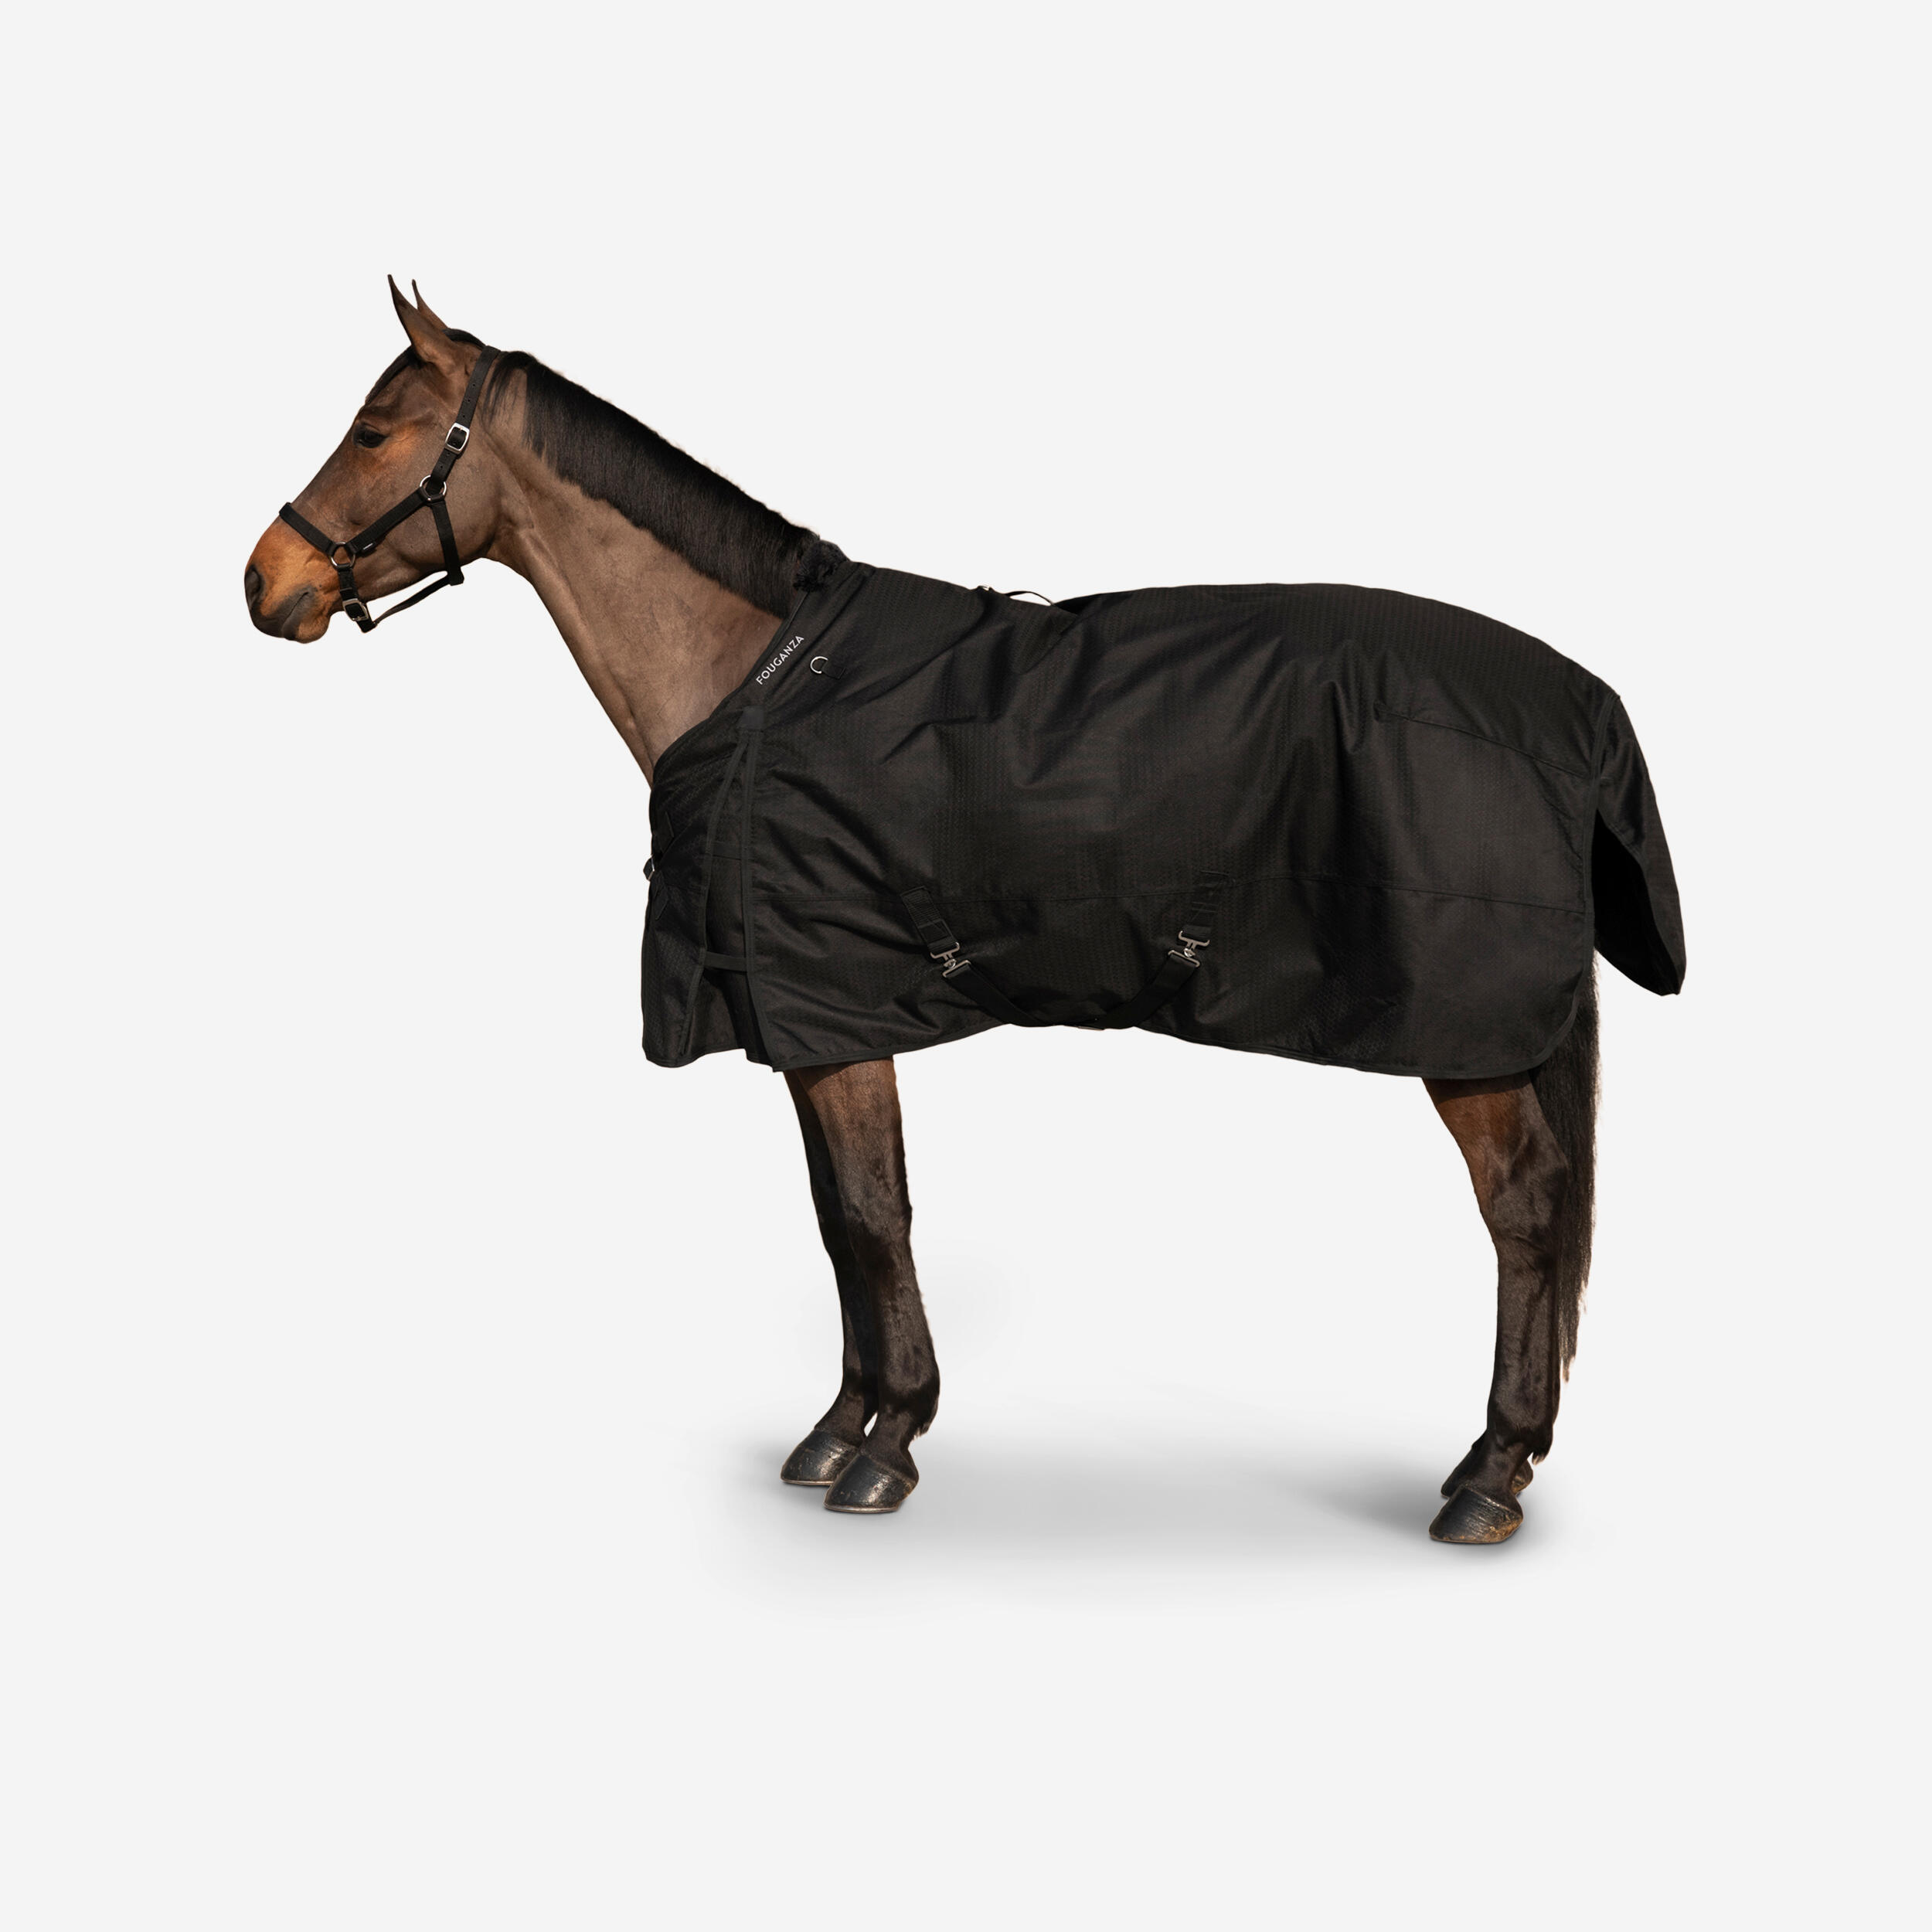 Horse Riding Waterproof Rug 1000D for Horse and Pony Allweather 200g 1/13